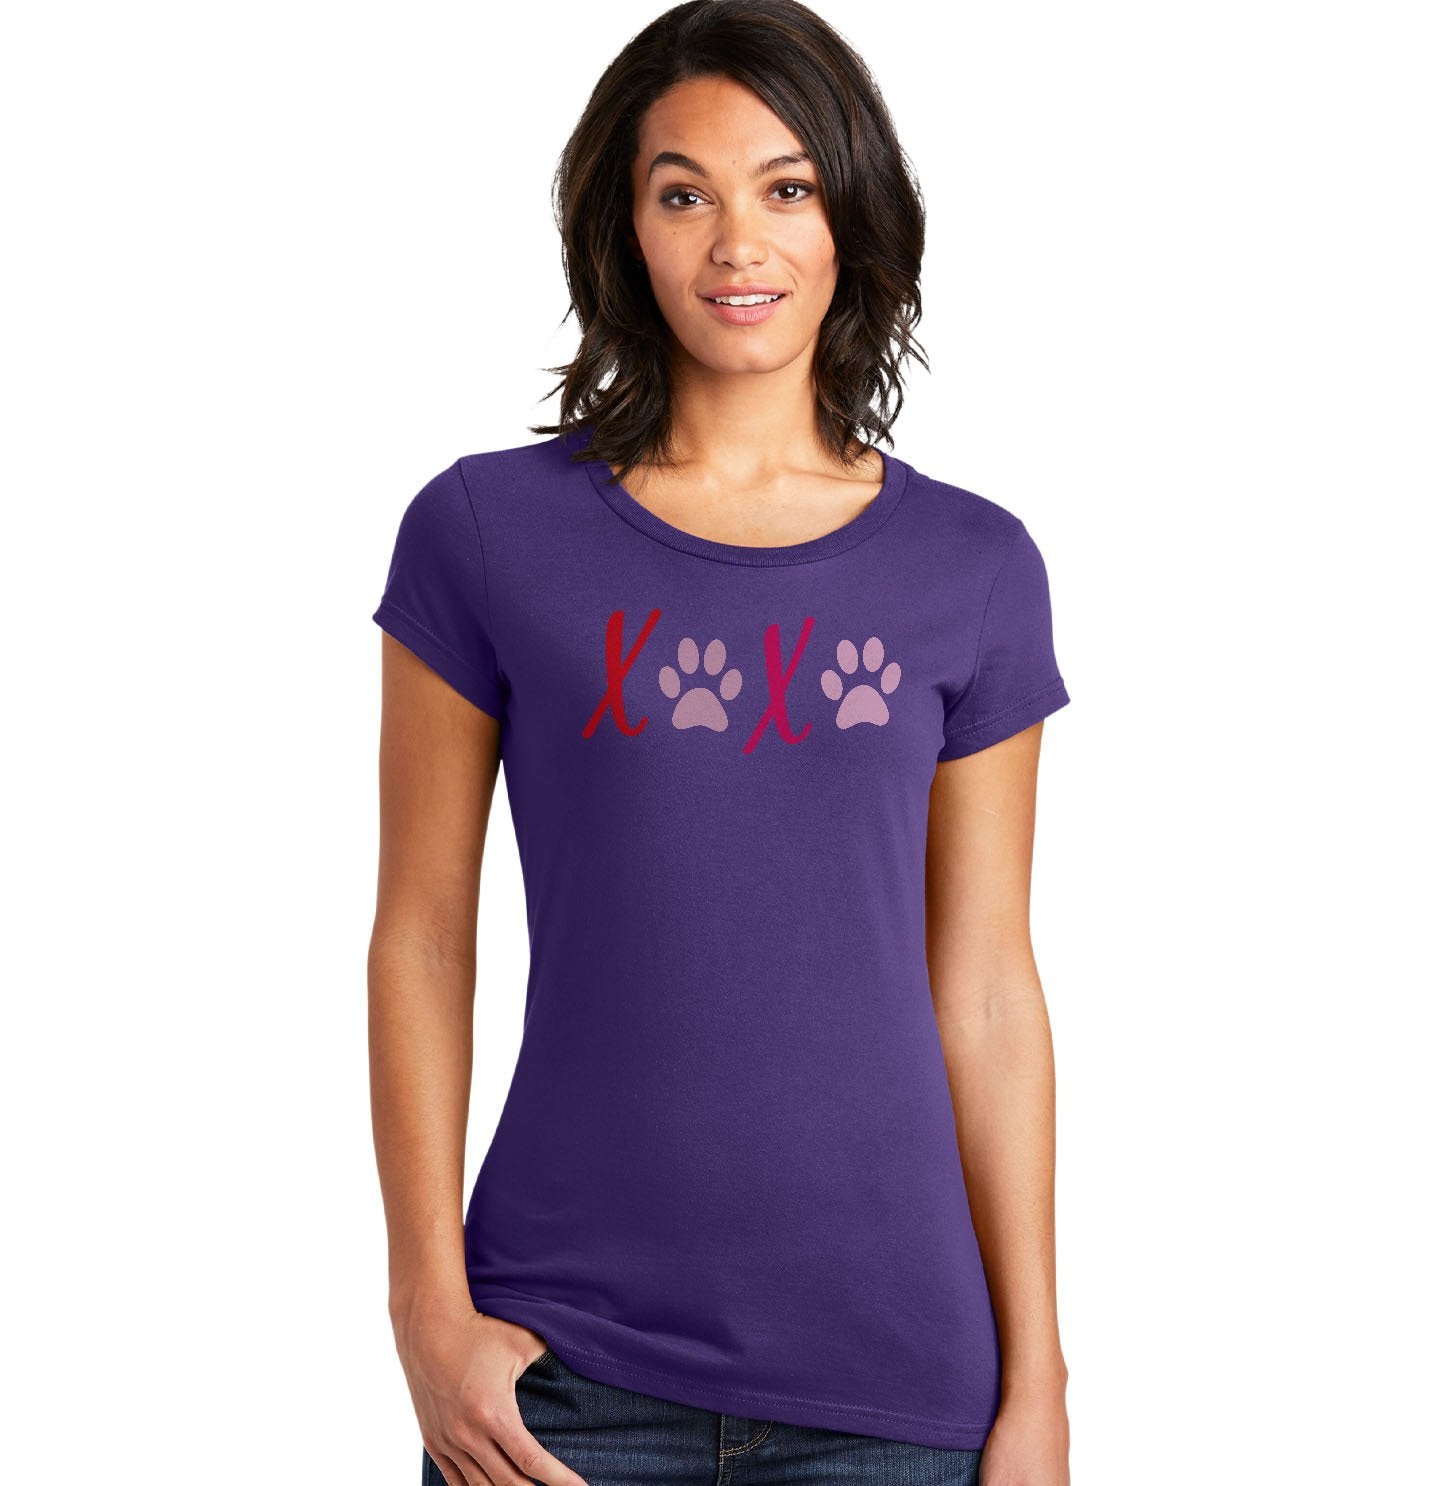 XOXO Dog Paws - Women's Fitted T-Shirt